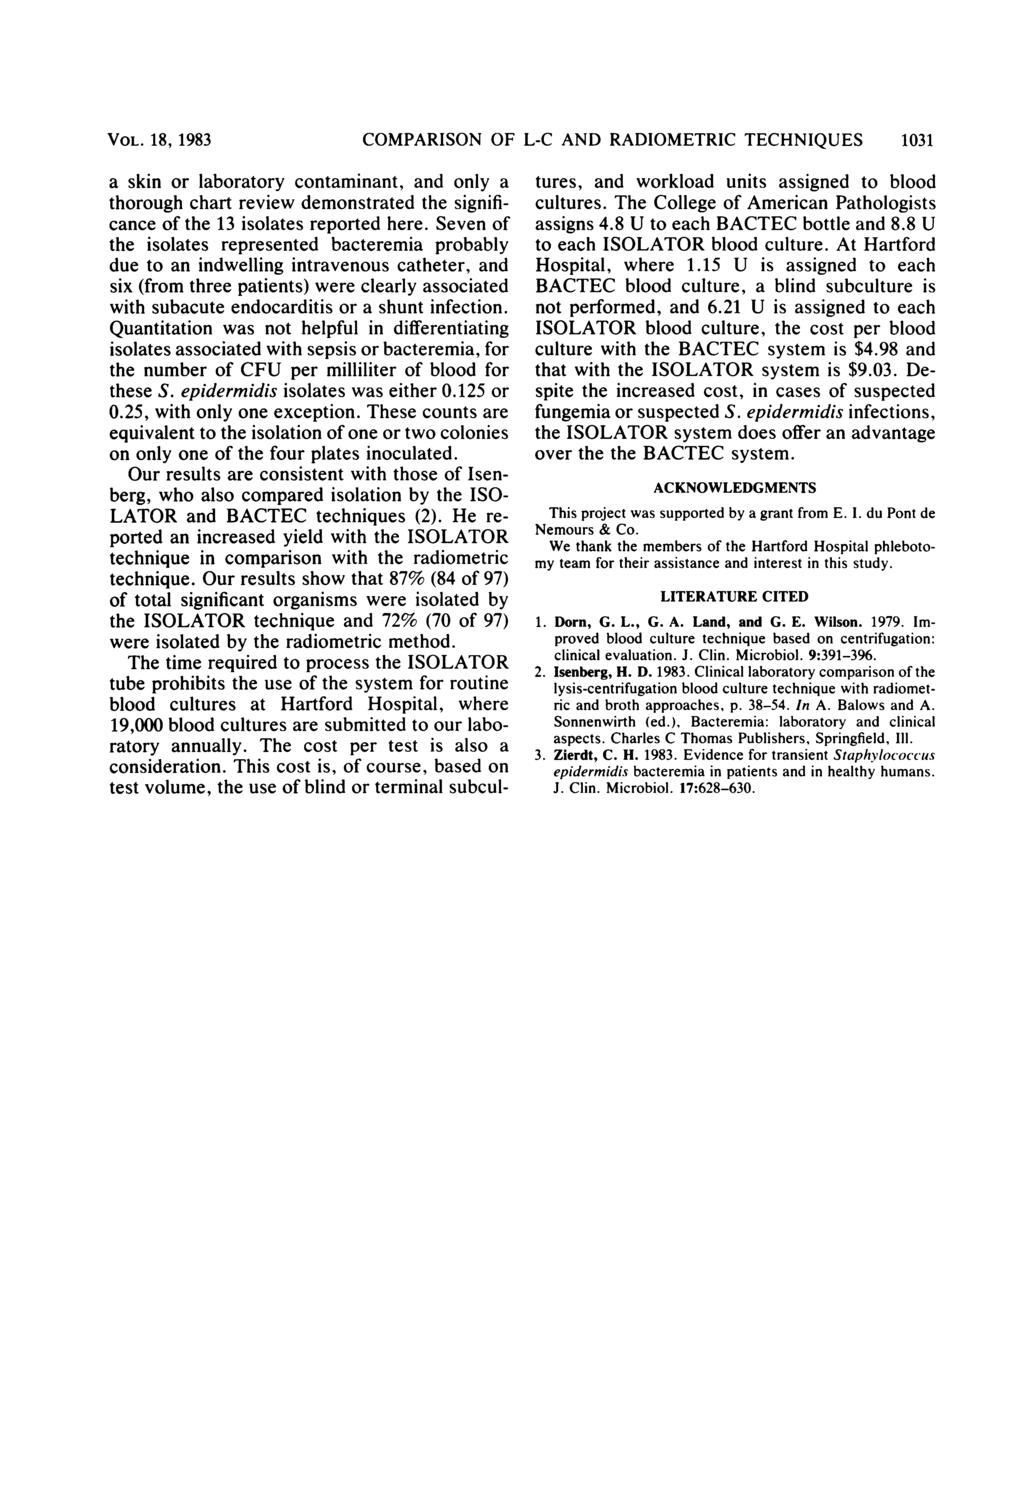 VOL. 18, 1983 a skin or laboratory contaminant, and only a thorough chart review demonstrated the significance of the 13 isolates reported here.